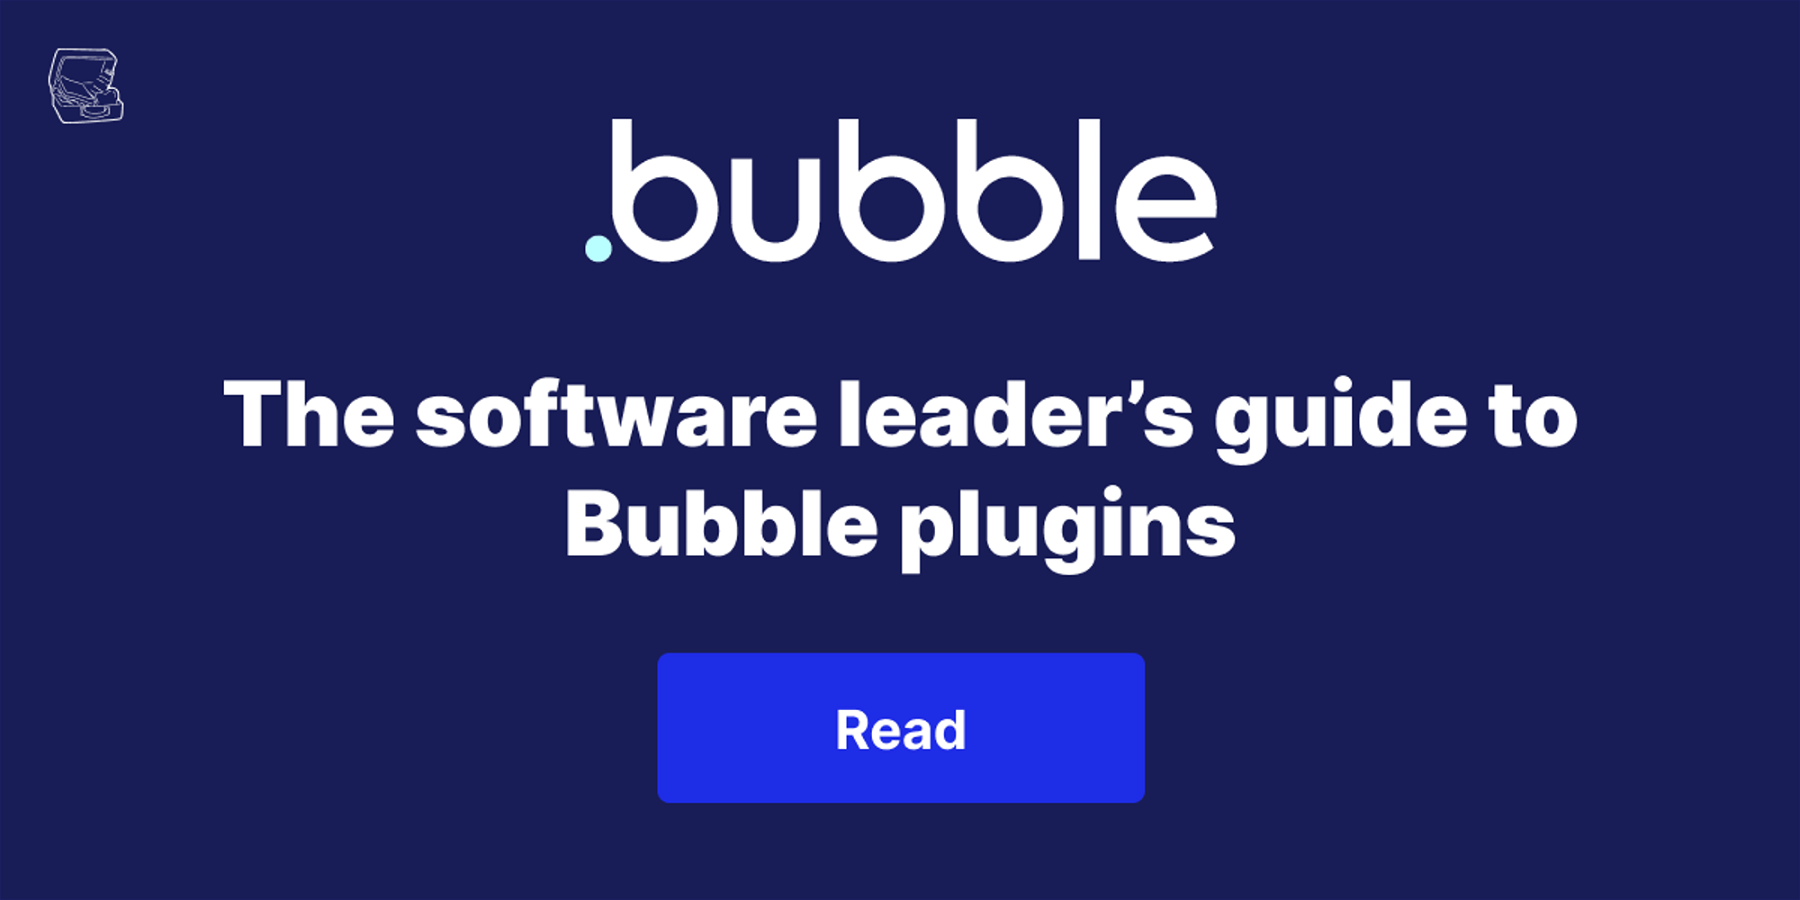 The software leader’s guide to Bubble plugins